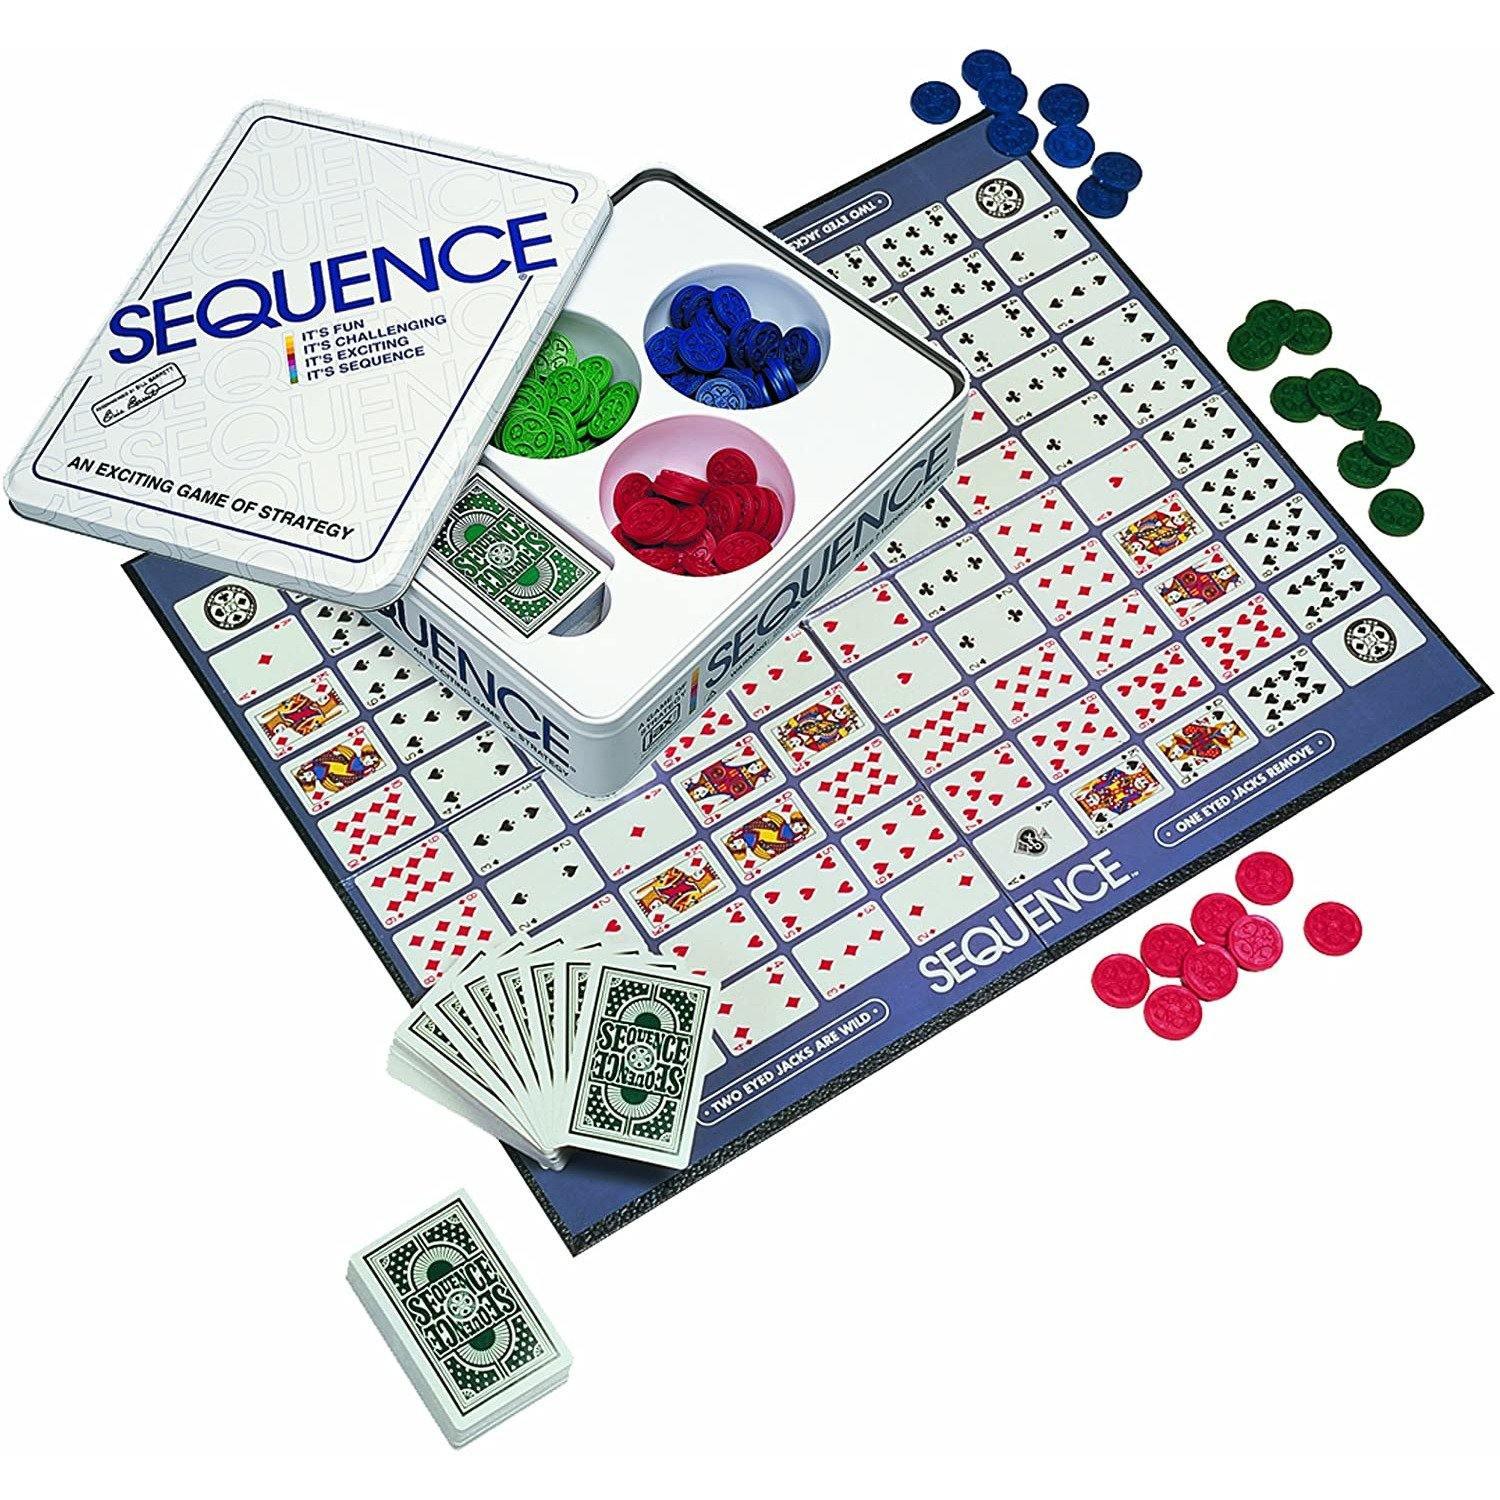 Sequence Game With Folding Board, Cards And Chips - BumbleToys - +18, 8-13 Years, Card & Board Games, Puzzle & Board & Card Games, Toy Land, Unisex